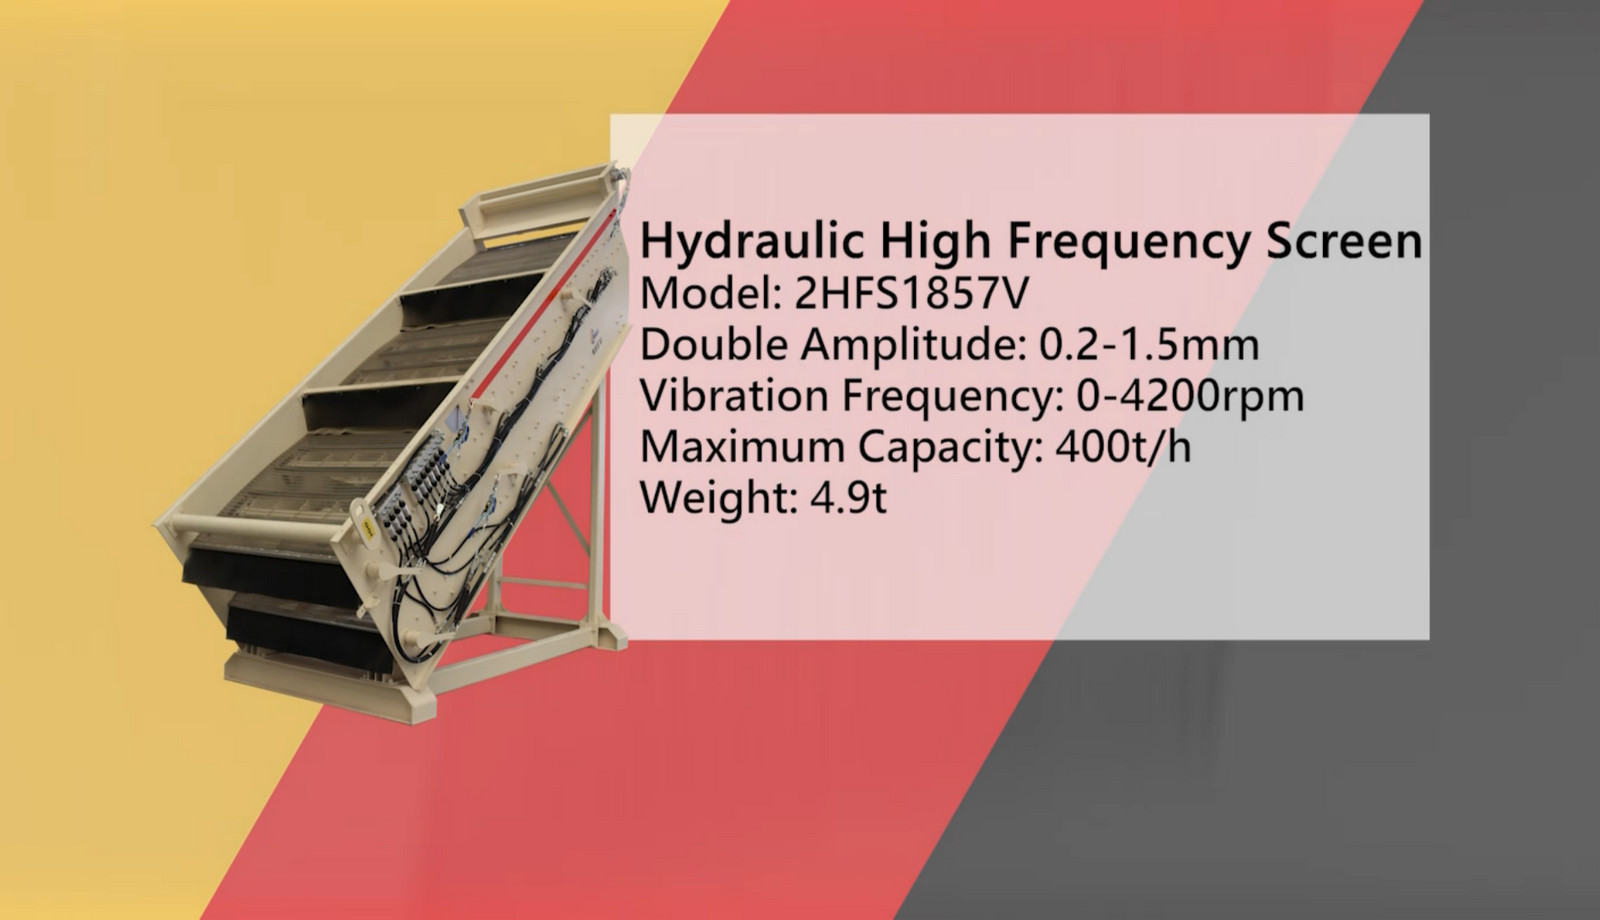 Introduction of 2HFS1857V Hydraulic High Frequency Screen